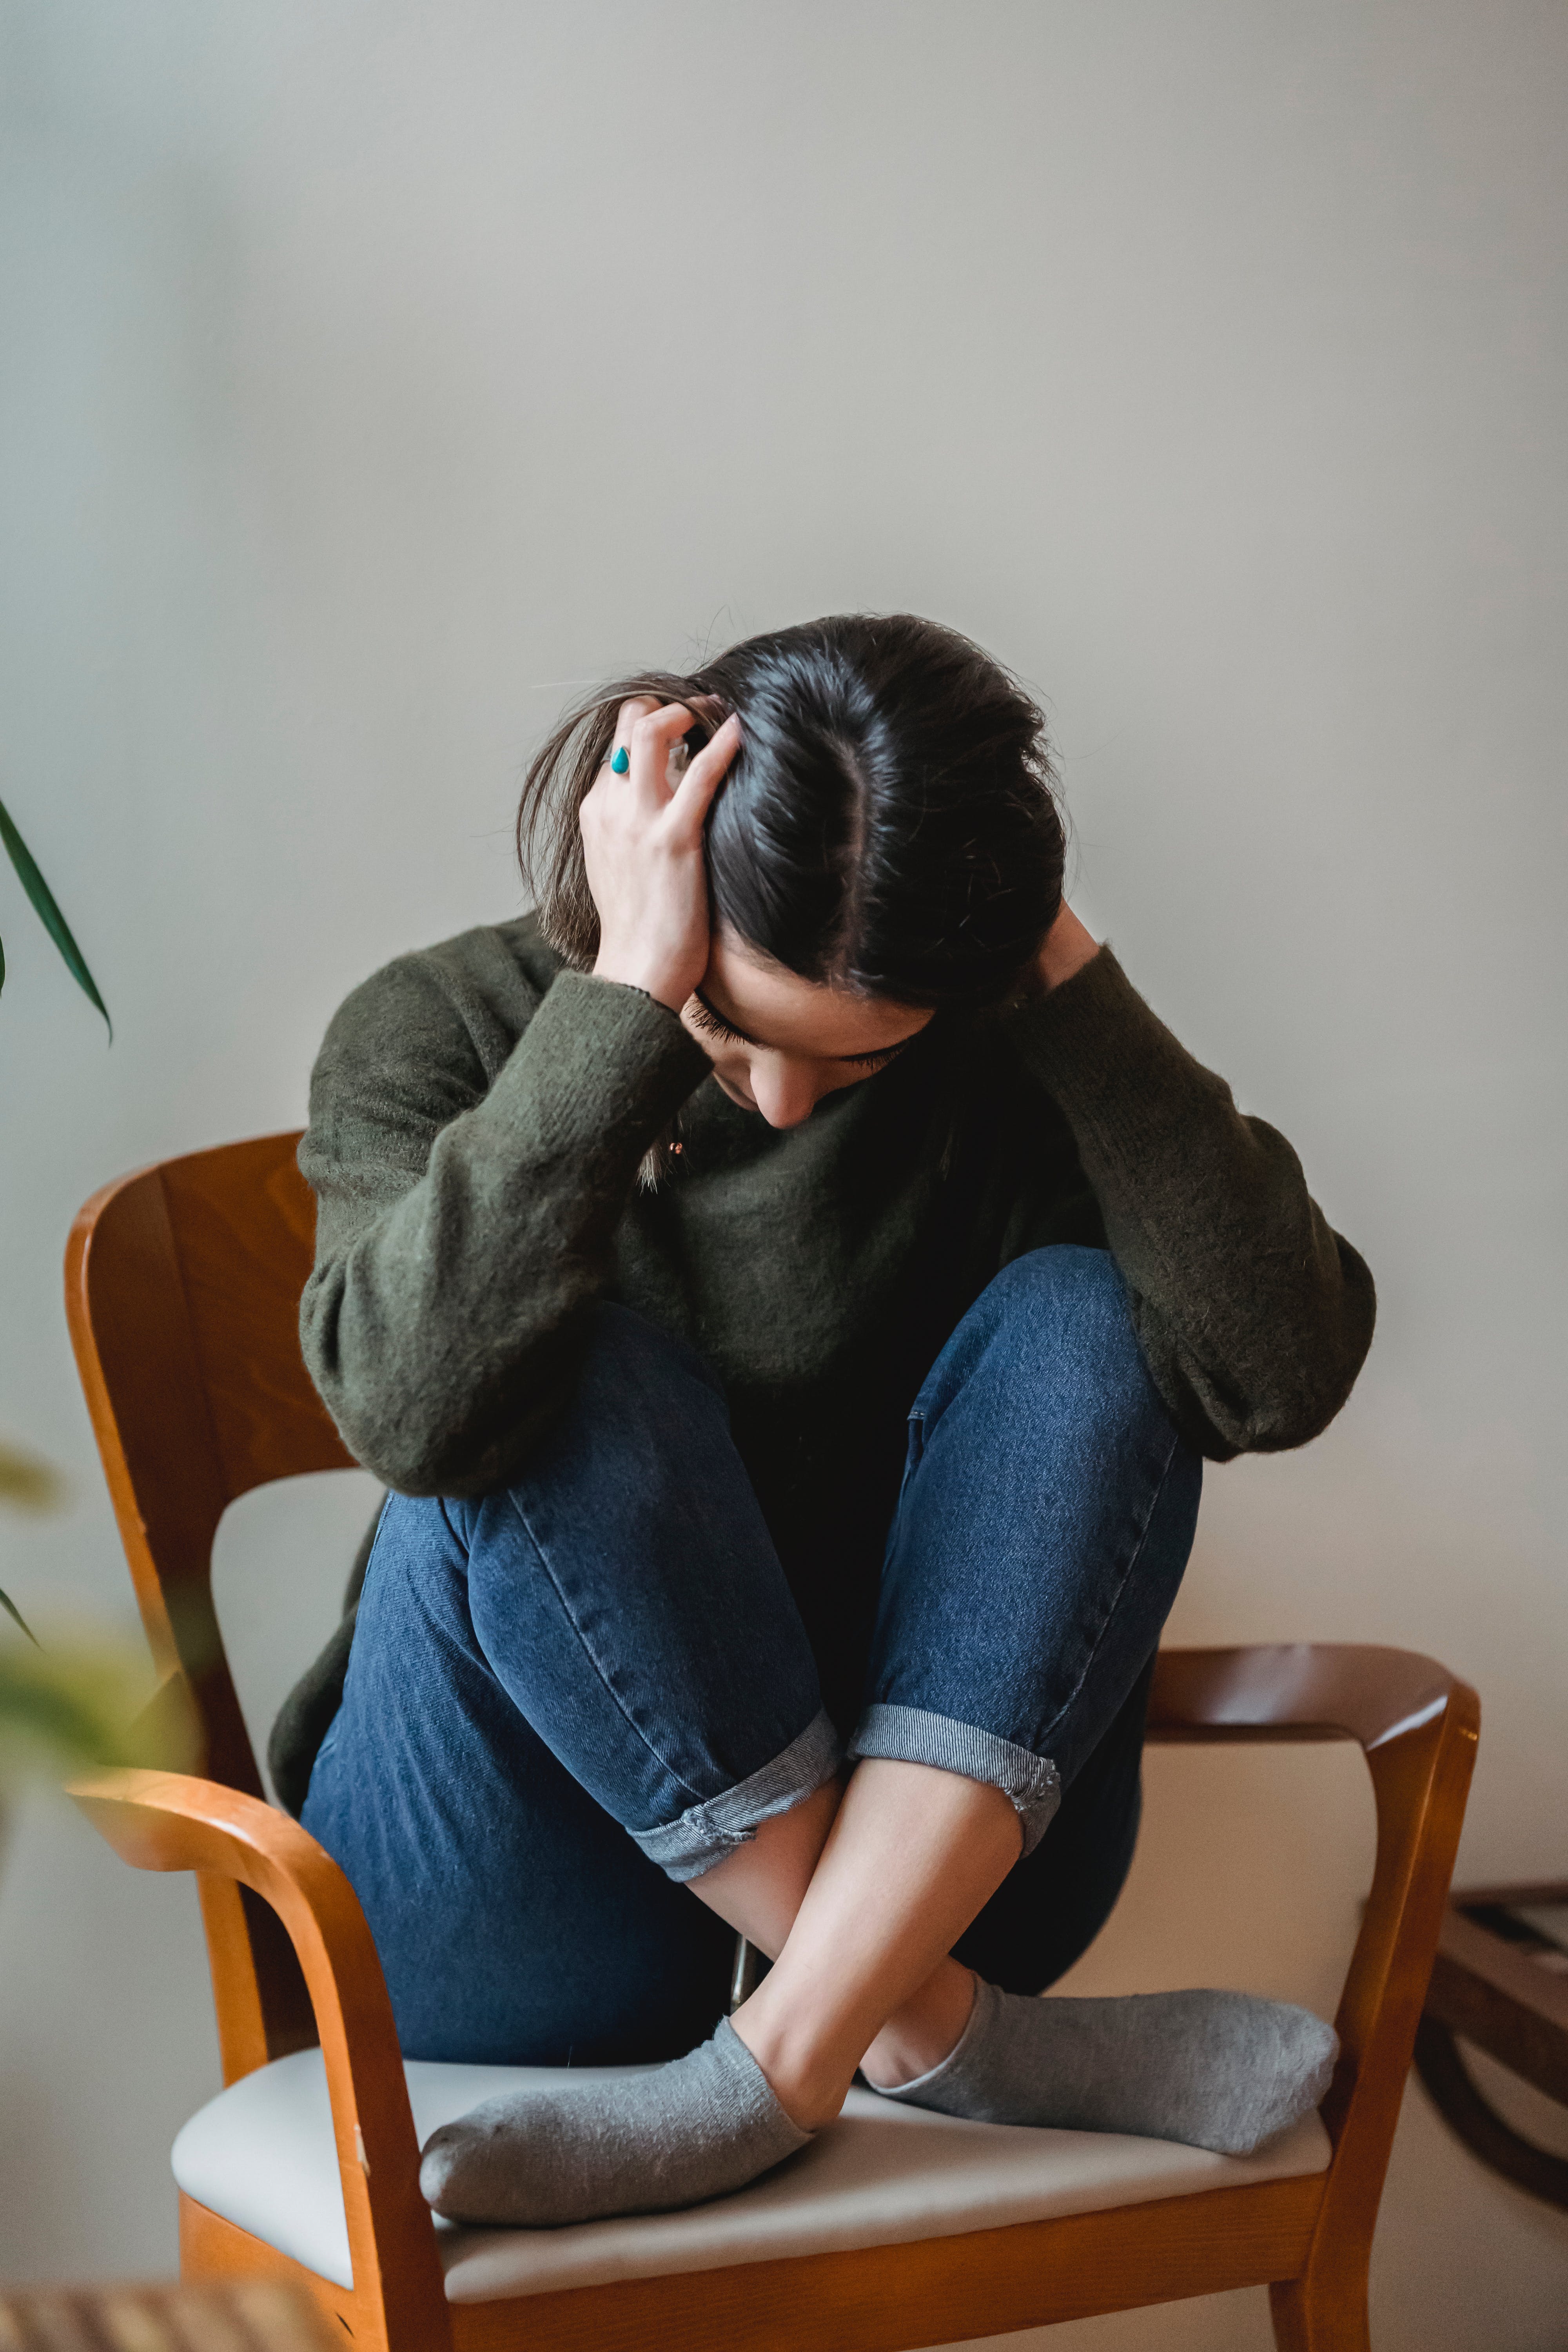 An upset woman sitting cross-legged on a chair while holding her head with her hands | Source: Pexels